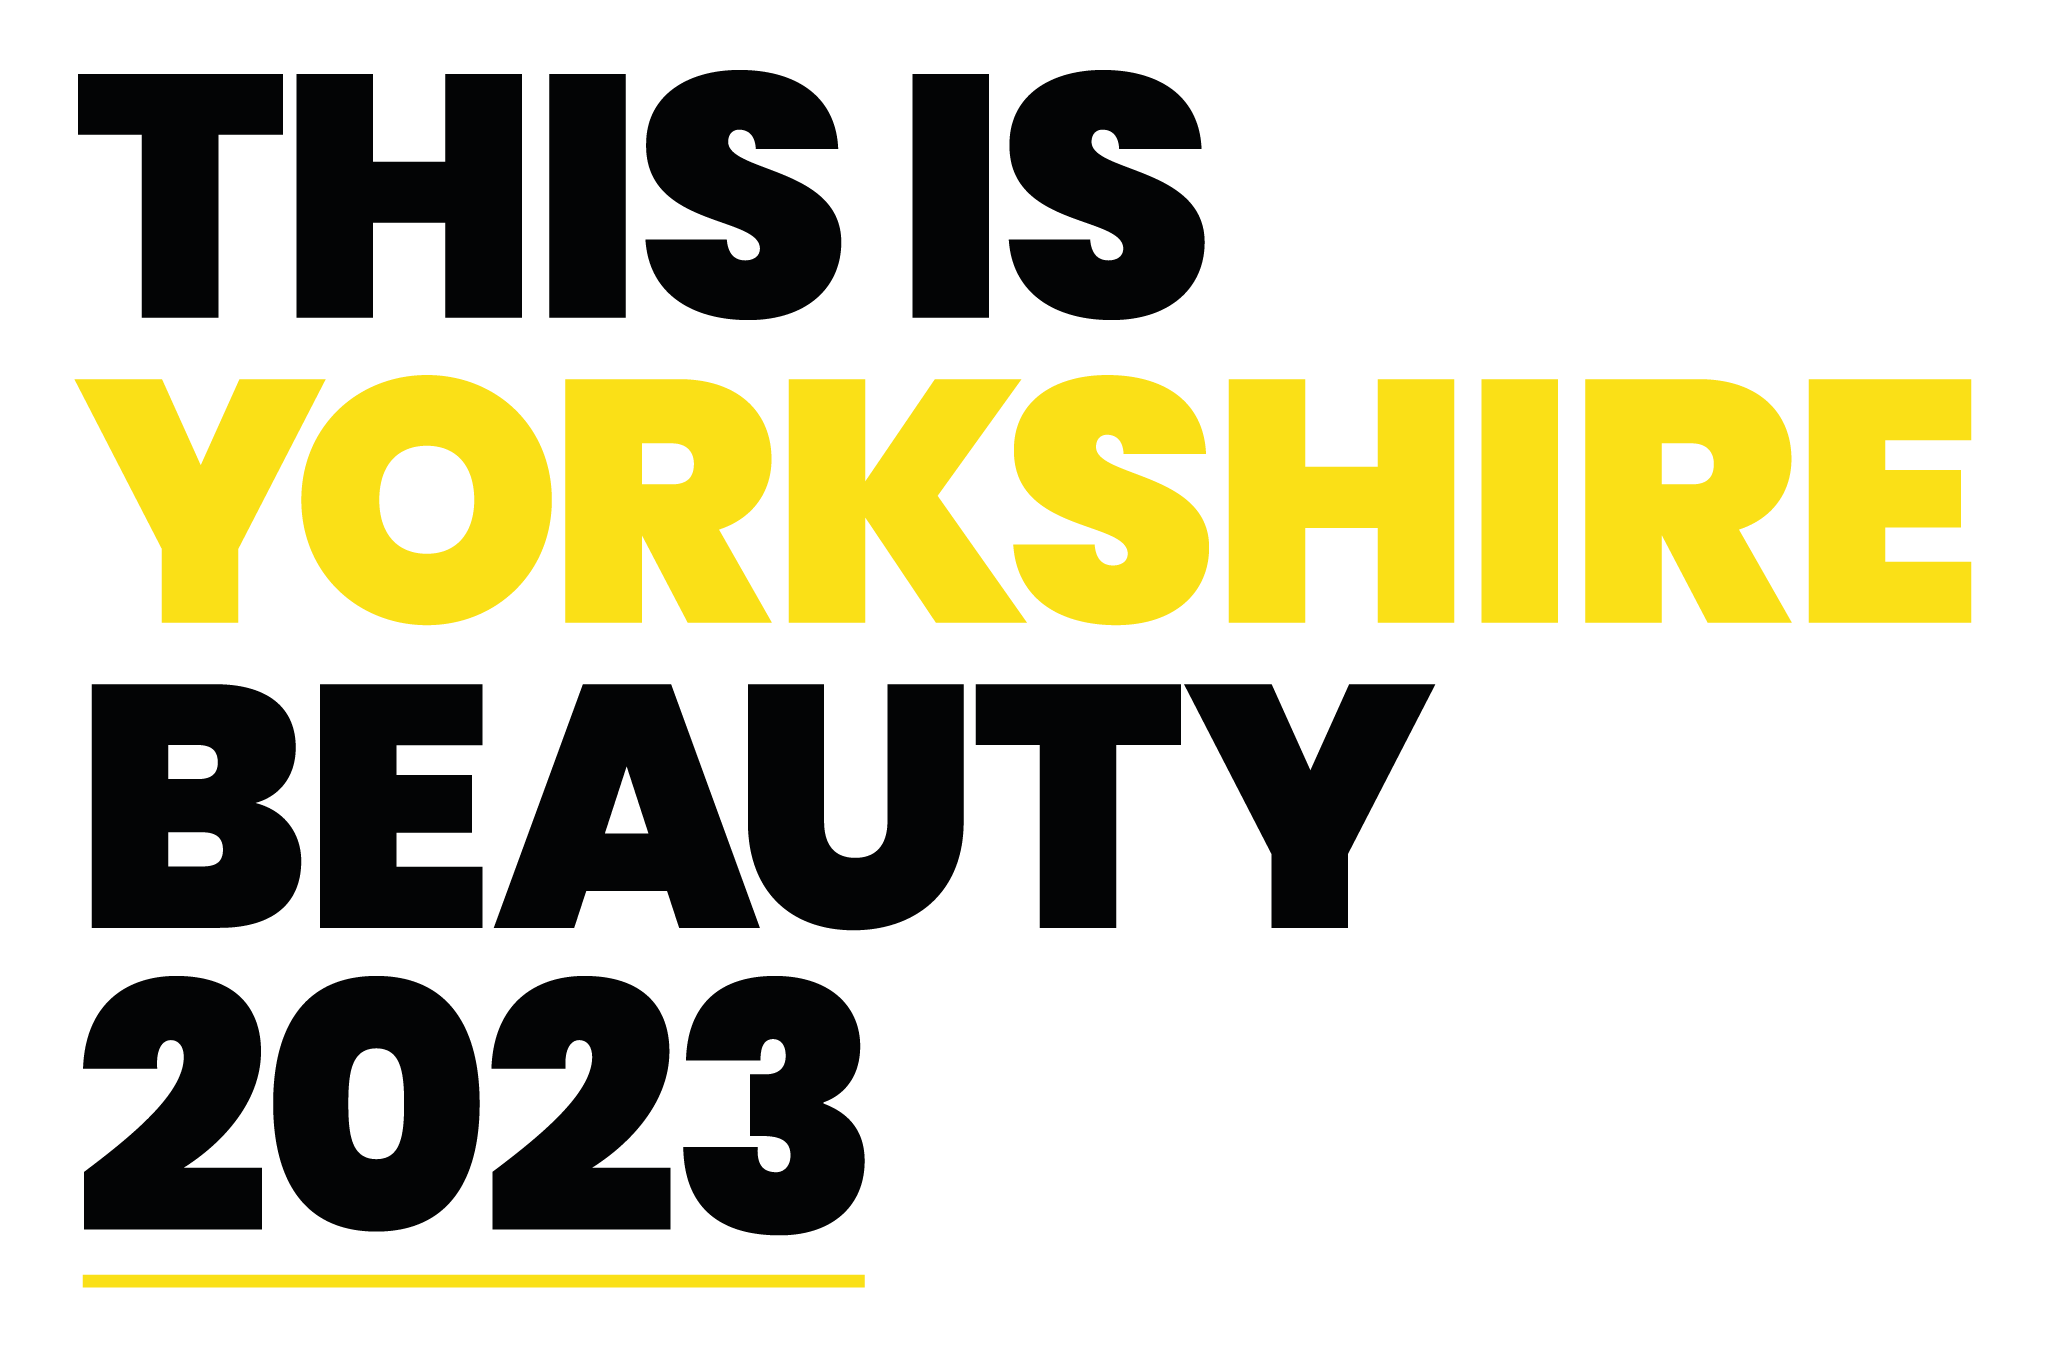 You’re invited to the Yorkshire Beauty Town Hall Event